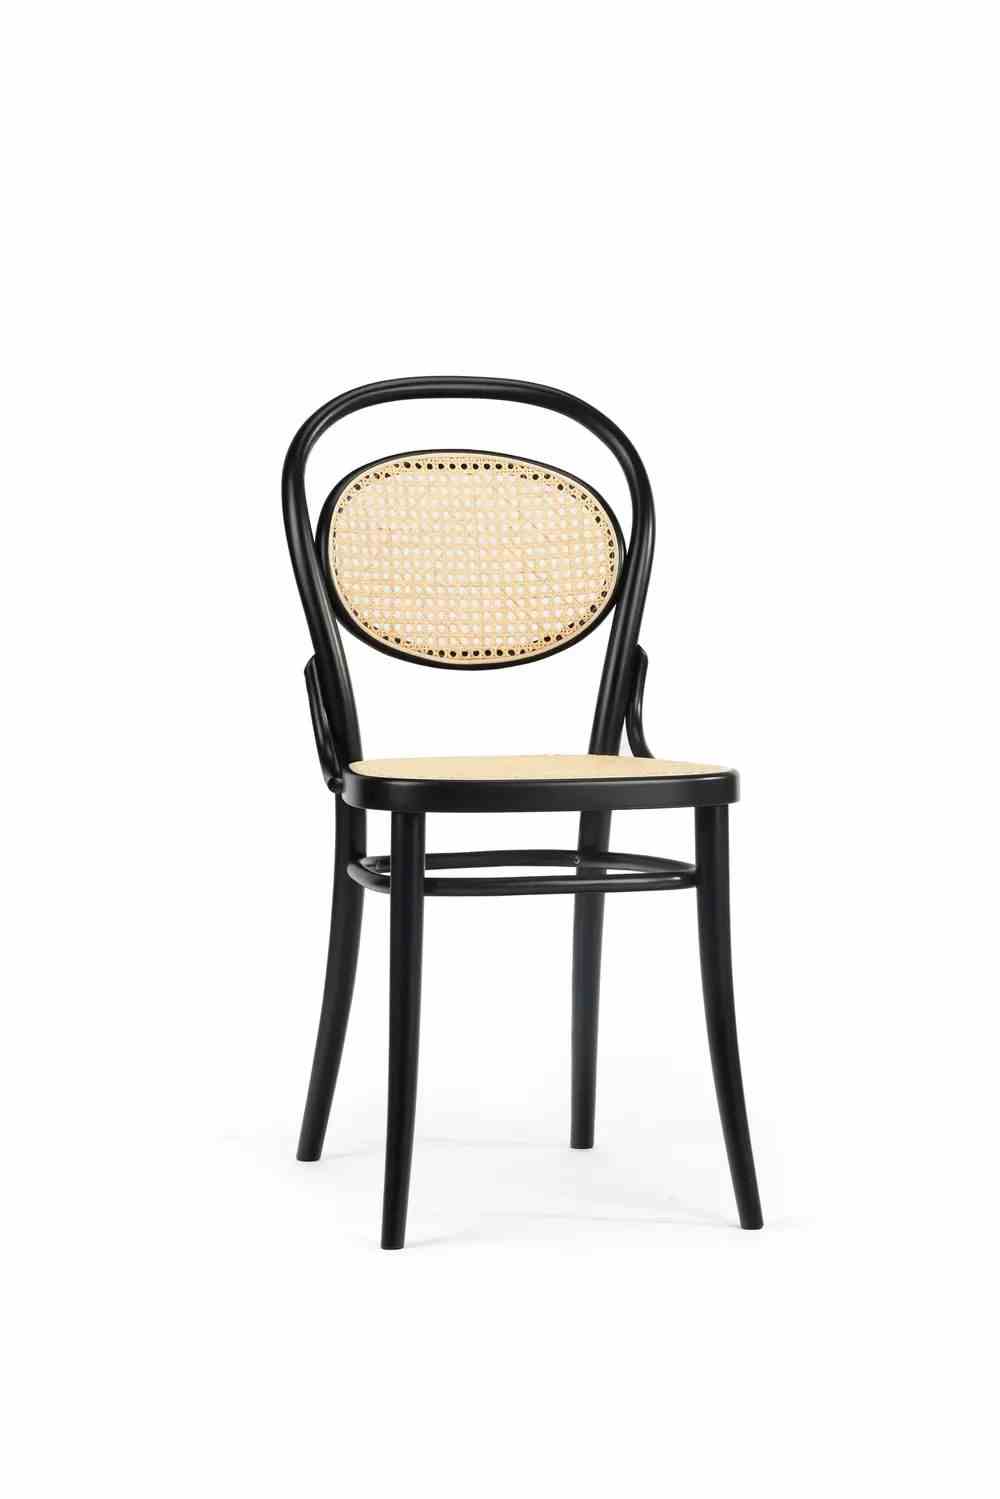 The Chair 20 